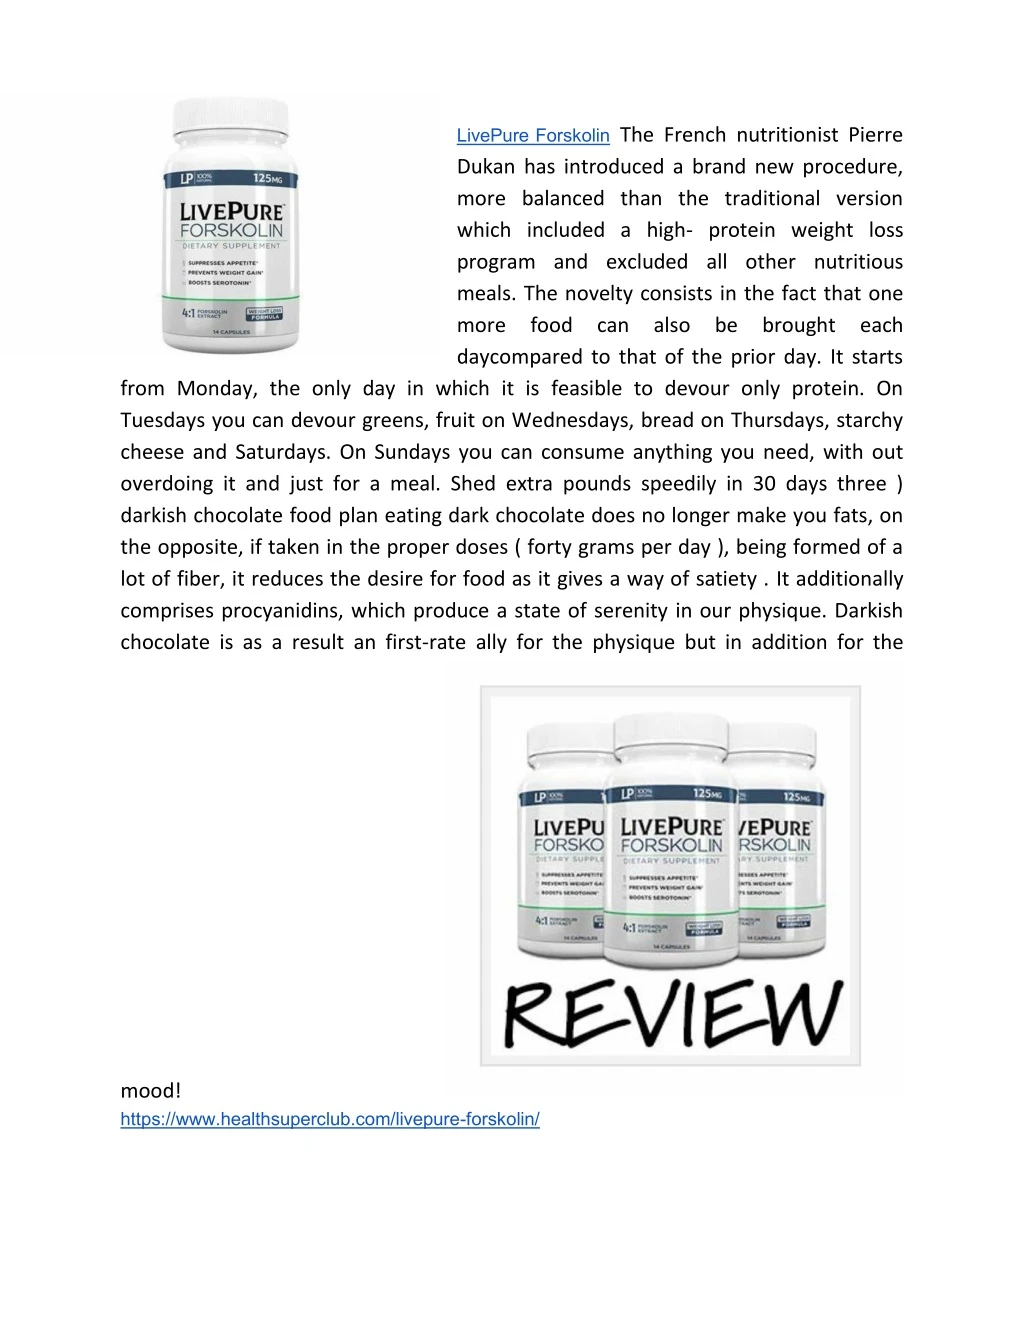 livepure forskolin the french nutritionist pierre